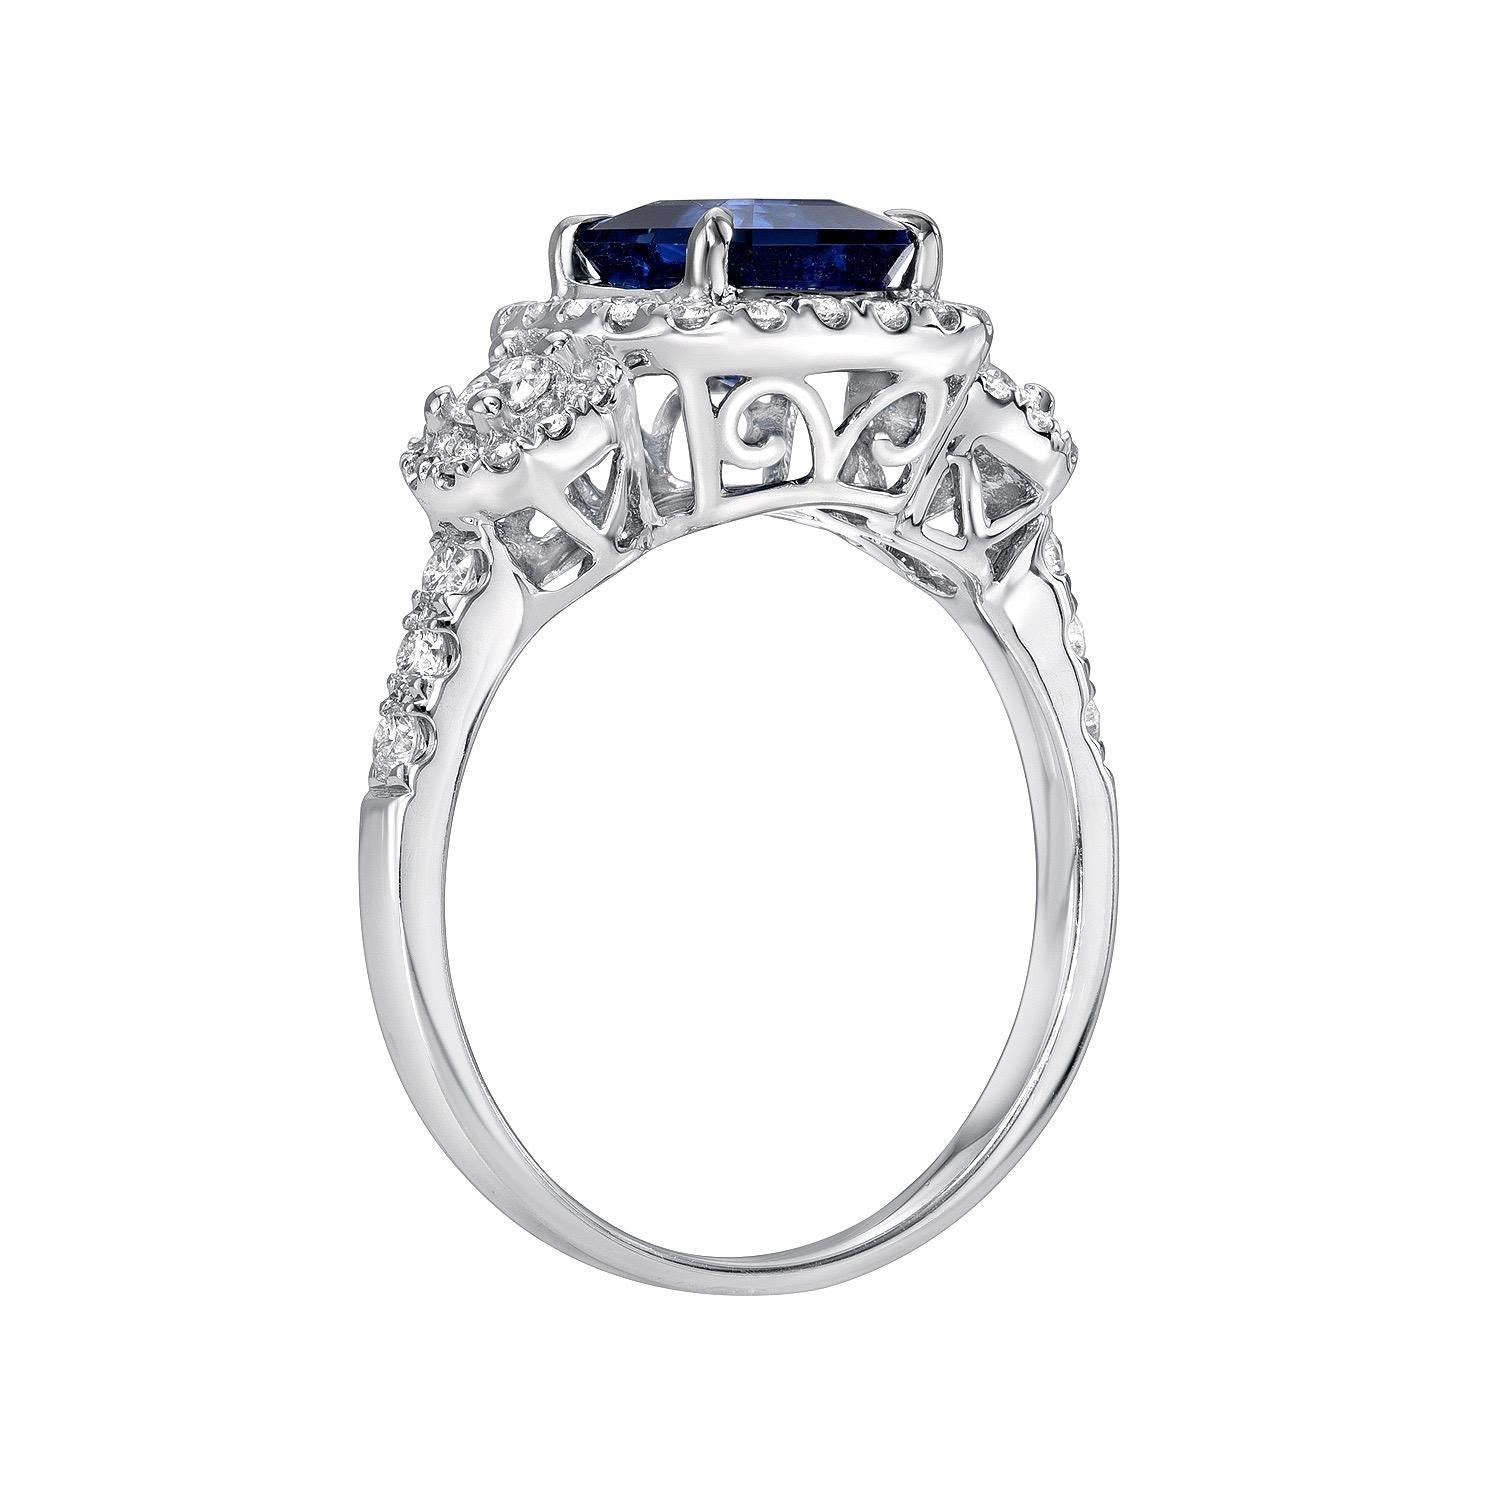 1.79 carat Blue Sapphire emerald-cut, set in a 0.94 carat total diamond, 18K white gold ring.
Ring size 6.5. Resizing is complimentary upon request.
Returns are accepted and paid by us within 7 days of delivery.

Please FOLLOW the TAMIR and MERKABA